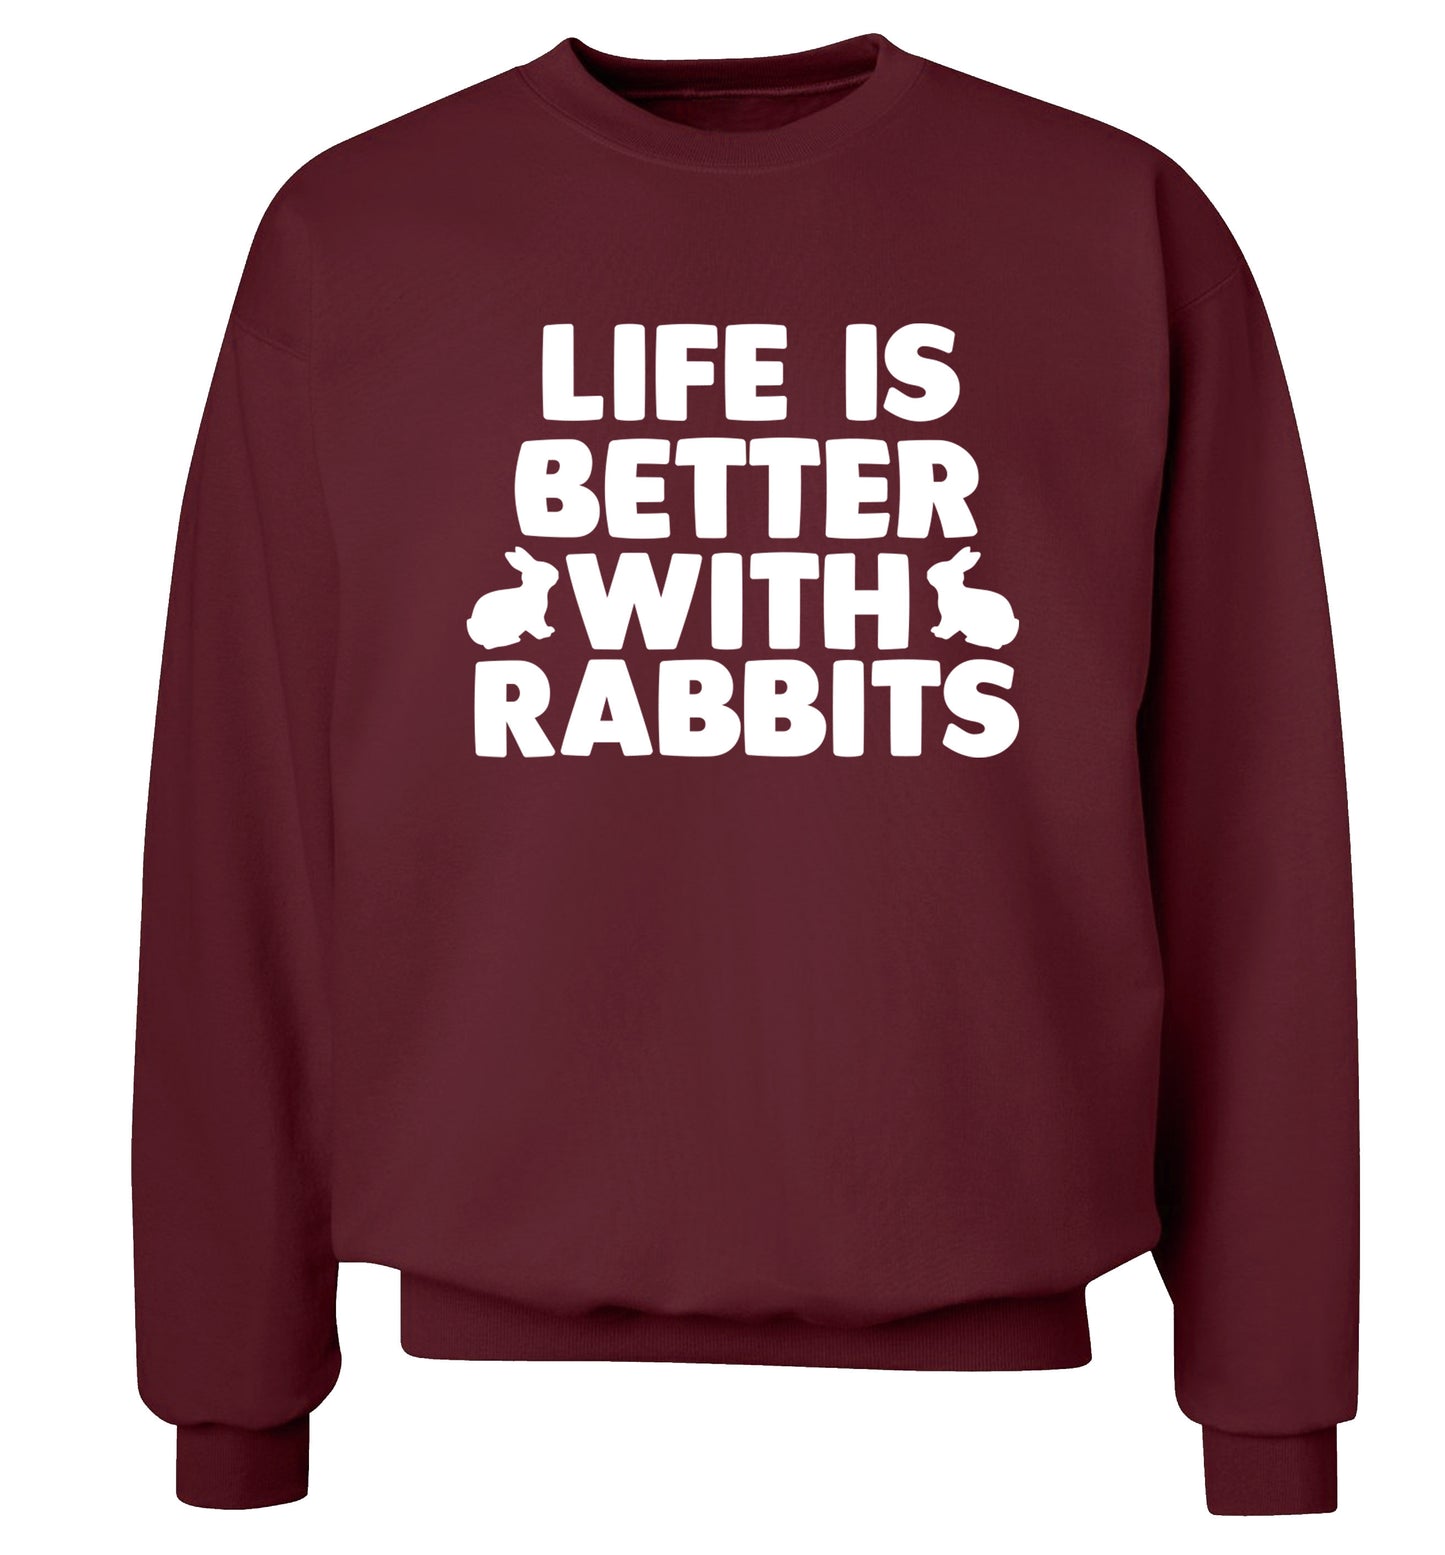 Life is better with rabbits Adult's unisex maroon  sweater 2XL